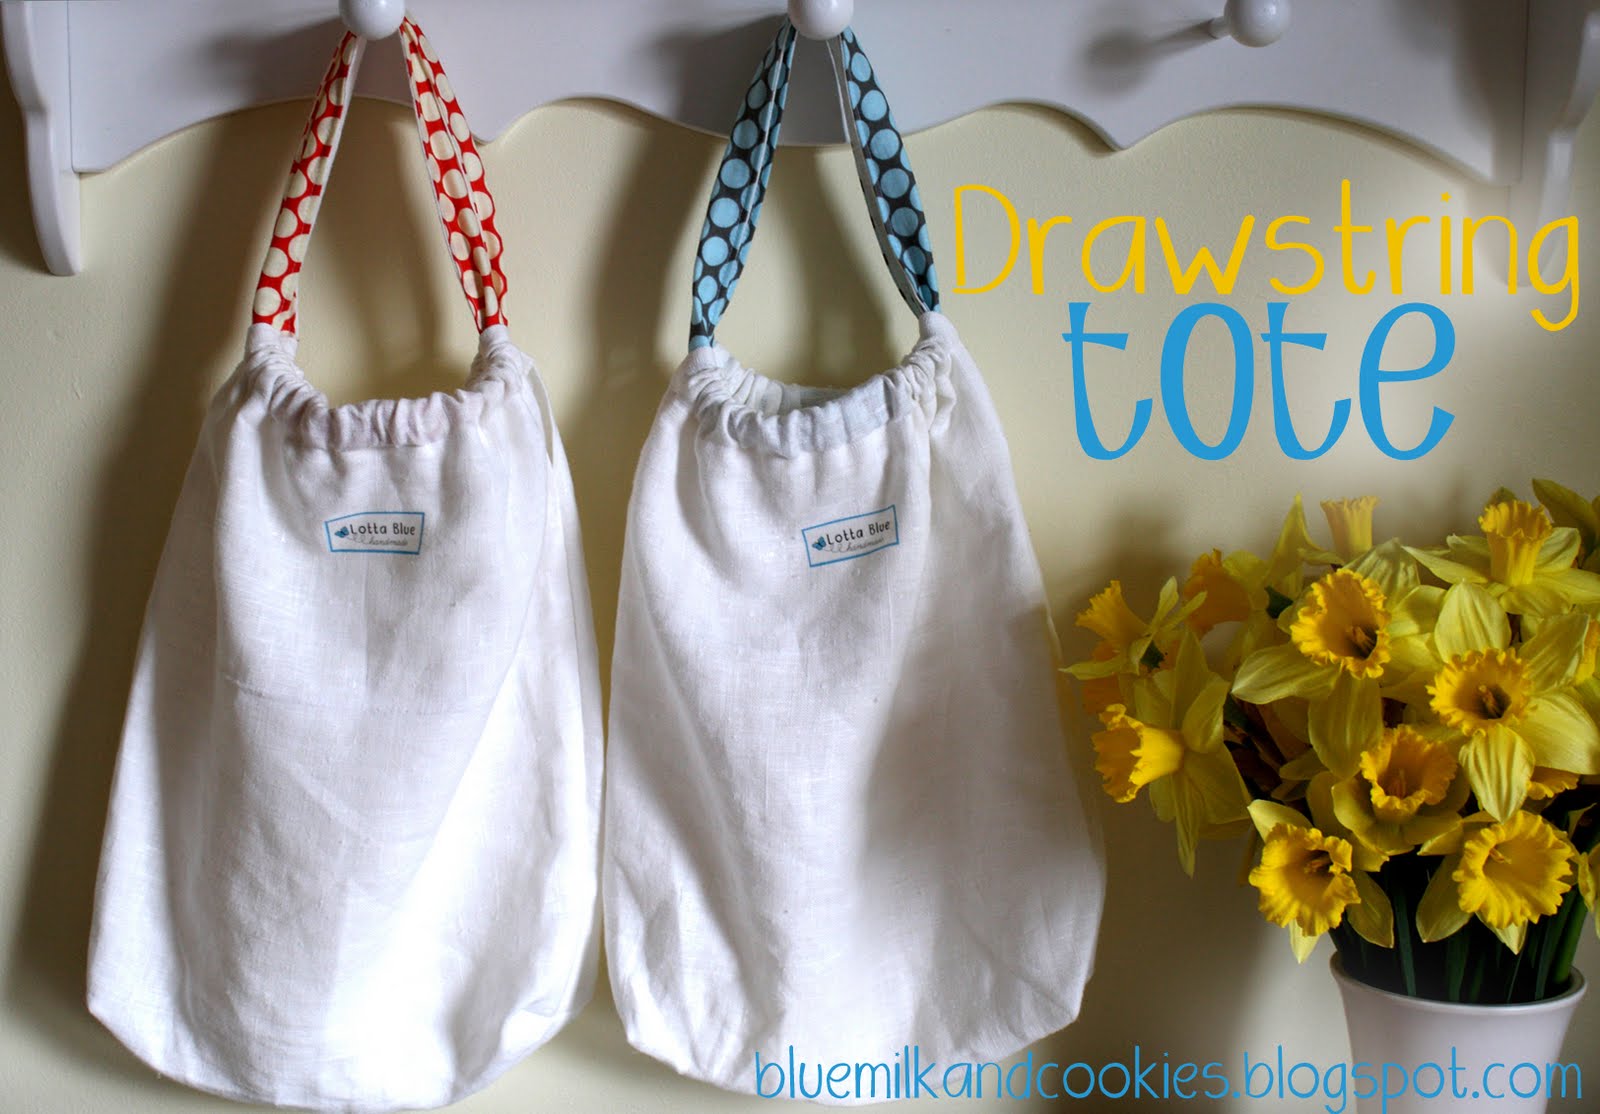 Blue Milk and Cookies: Drawstring tote bag: a tutorial